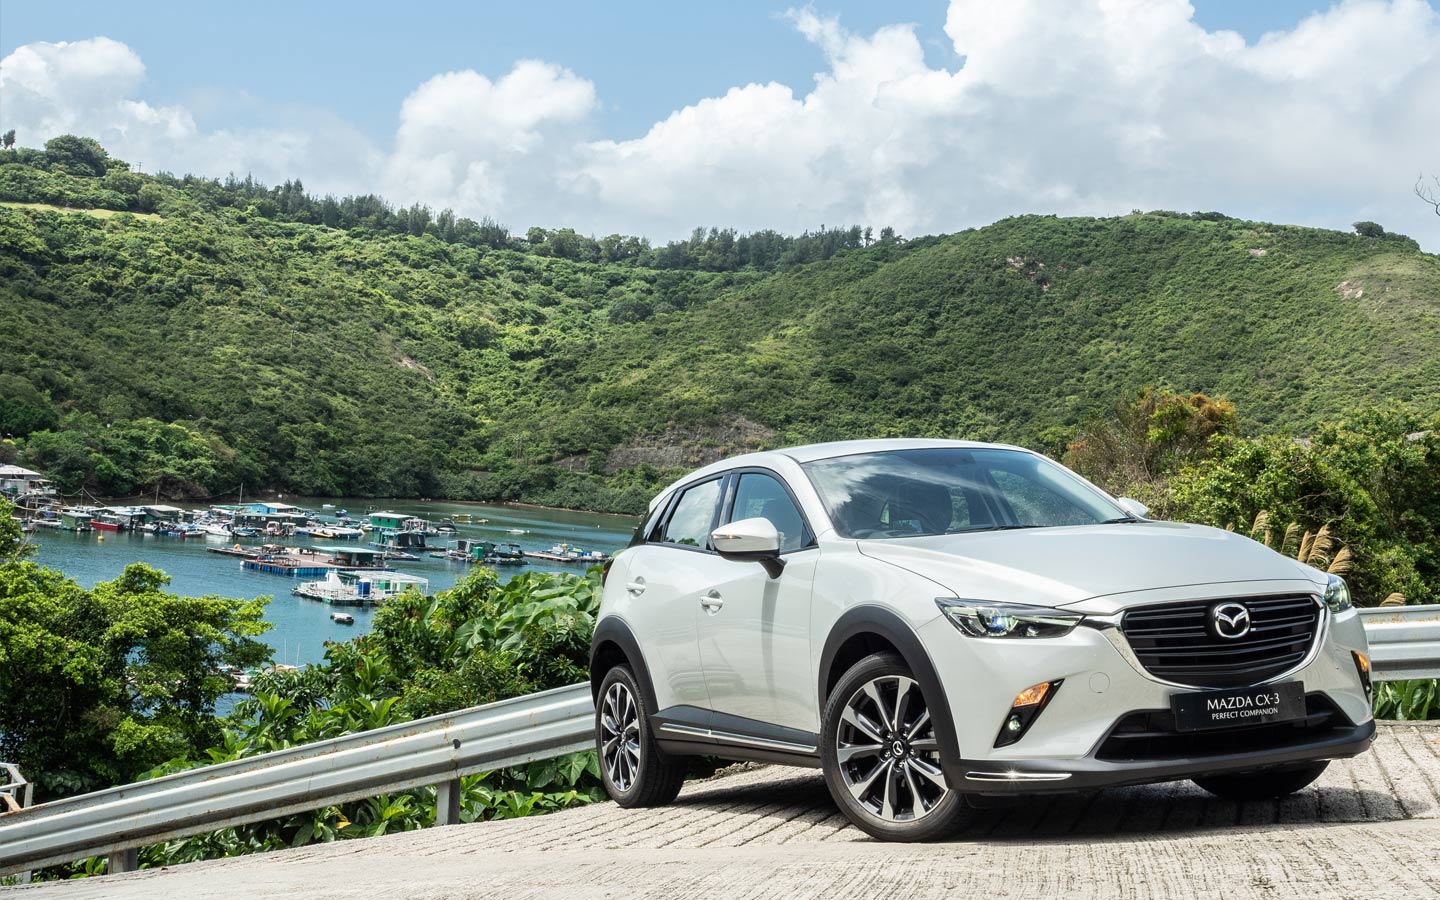 the cx-3 is among Popular Used Mazda SUVs in the UAE